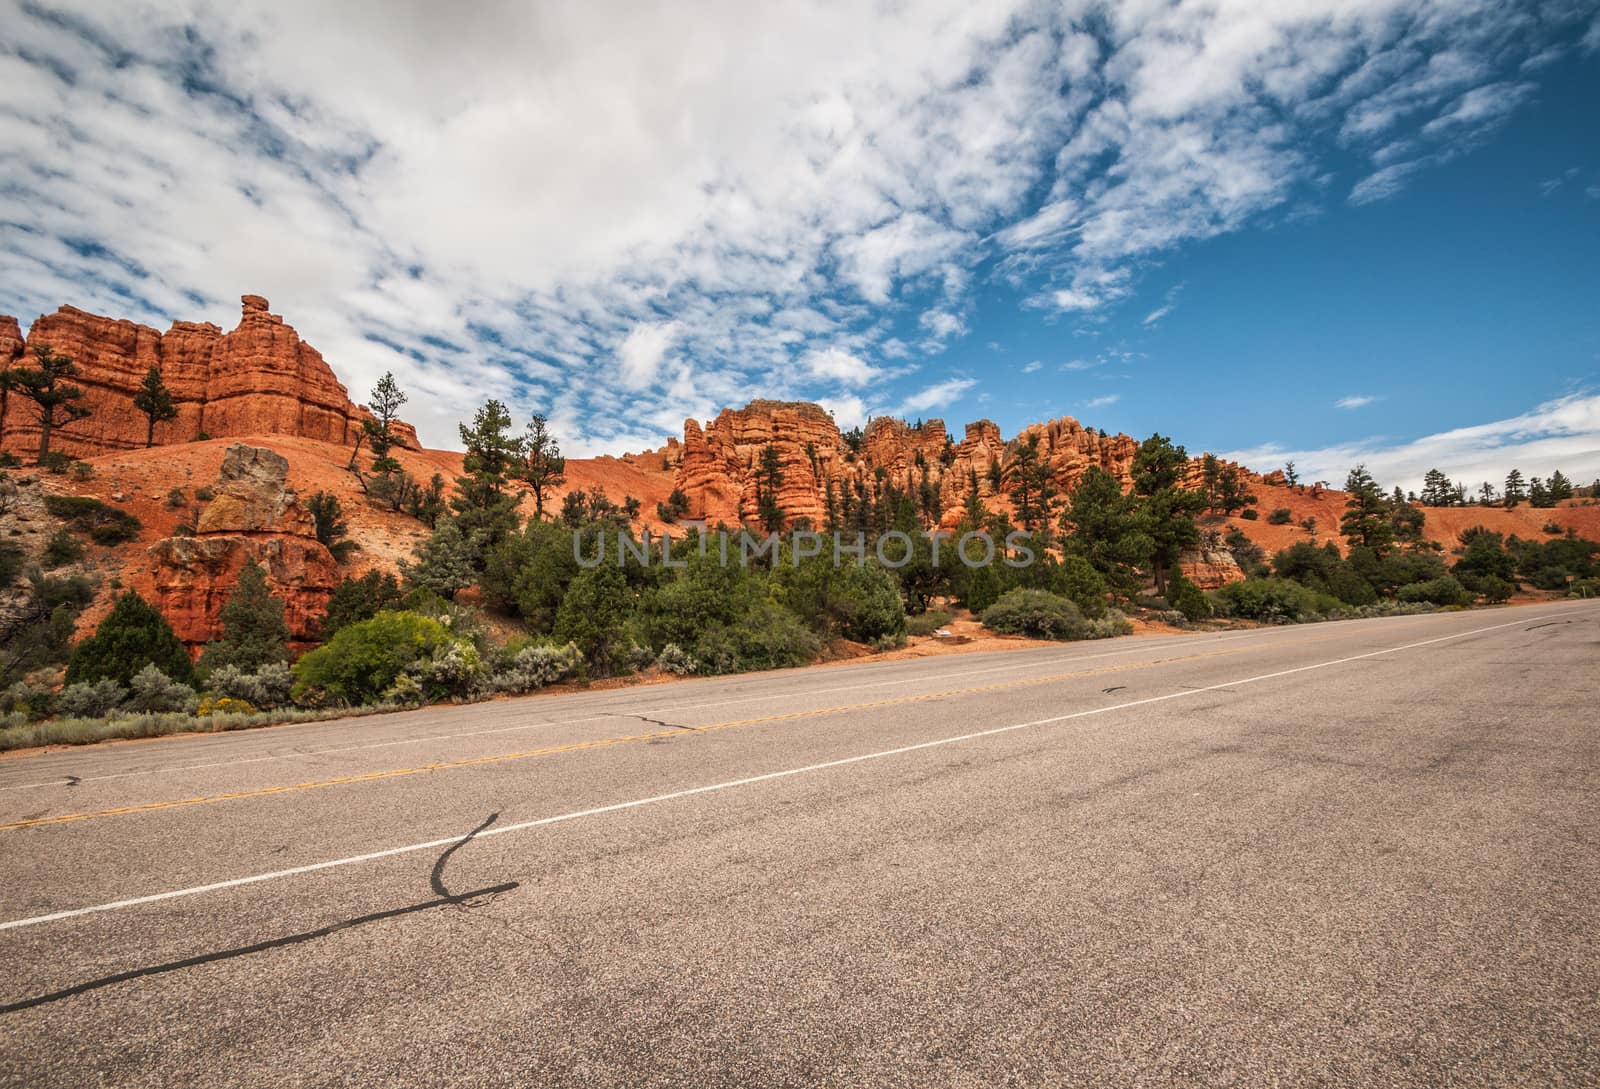 Road to Bryce Canyon by weltreisendertj